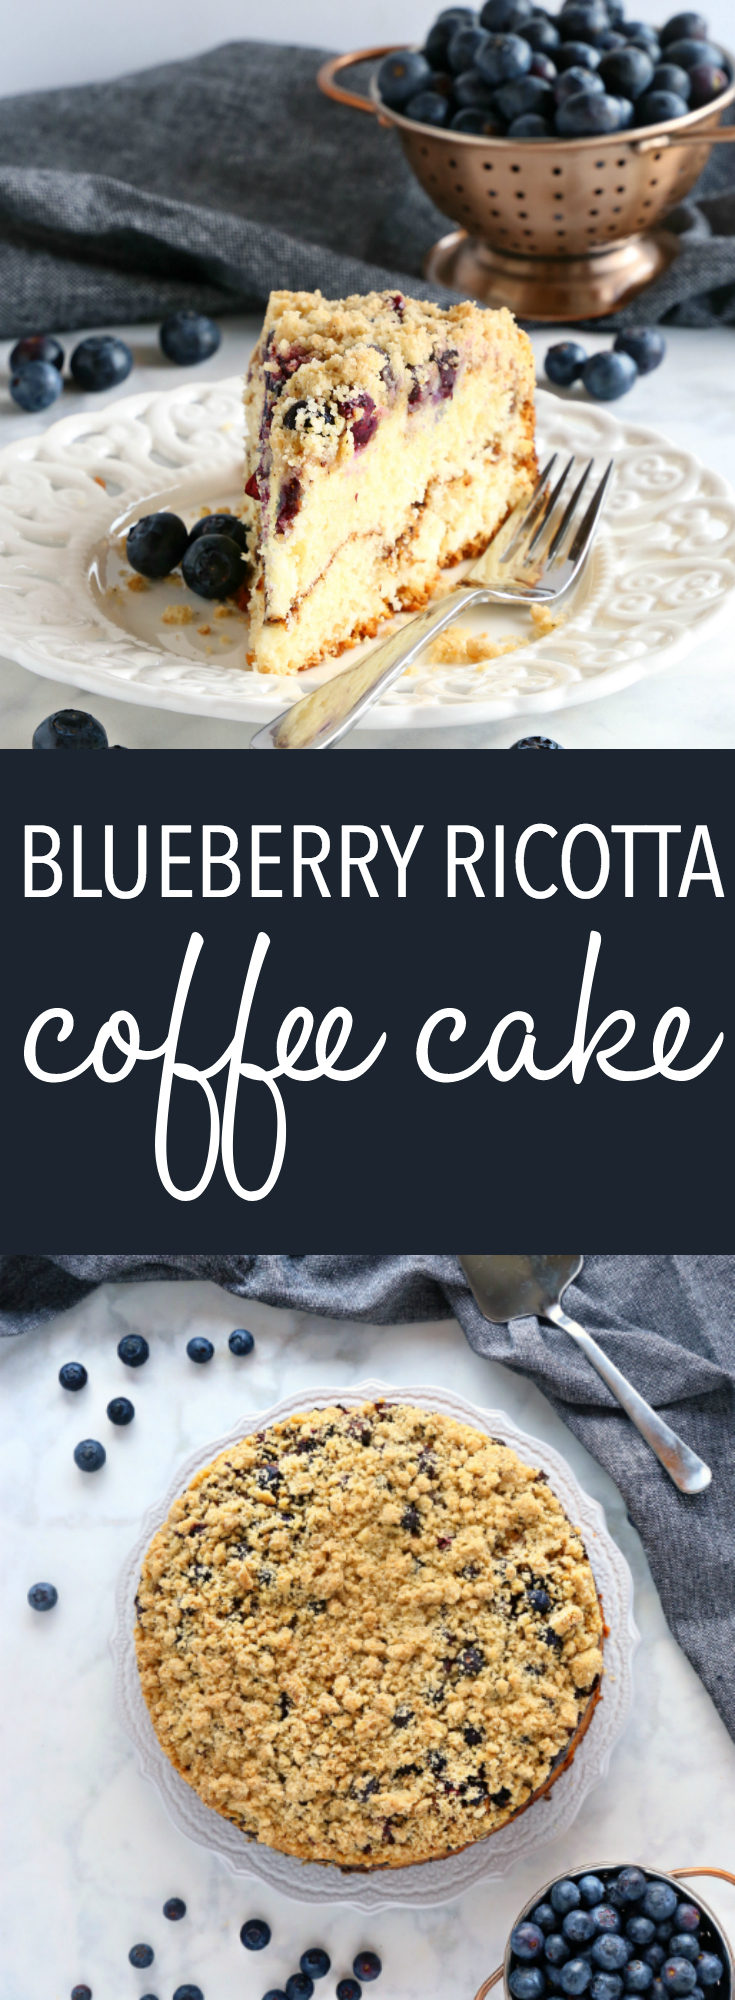 This Best Ever Blueberry Ricotta Coffee Cake is the perfect moist and fluffy coffee cake made with low fat ricotta, and packed with fresh blueberries, cinnamon sugar, and the best crispy streusel topping! Recipe from thebusybaker.ca! #bestcoffeecake #easycoffeecake #blueberrycake via @busybakerblog